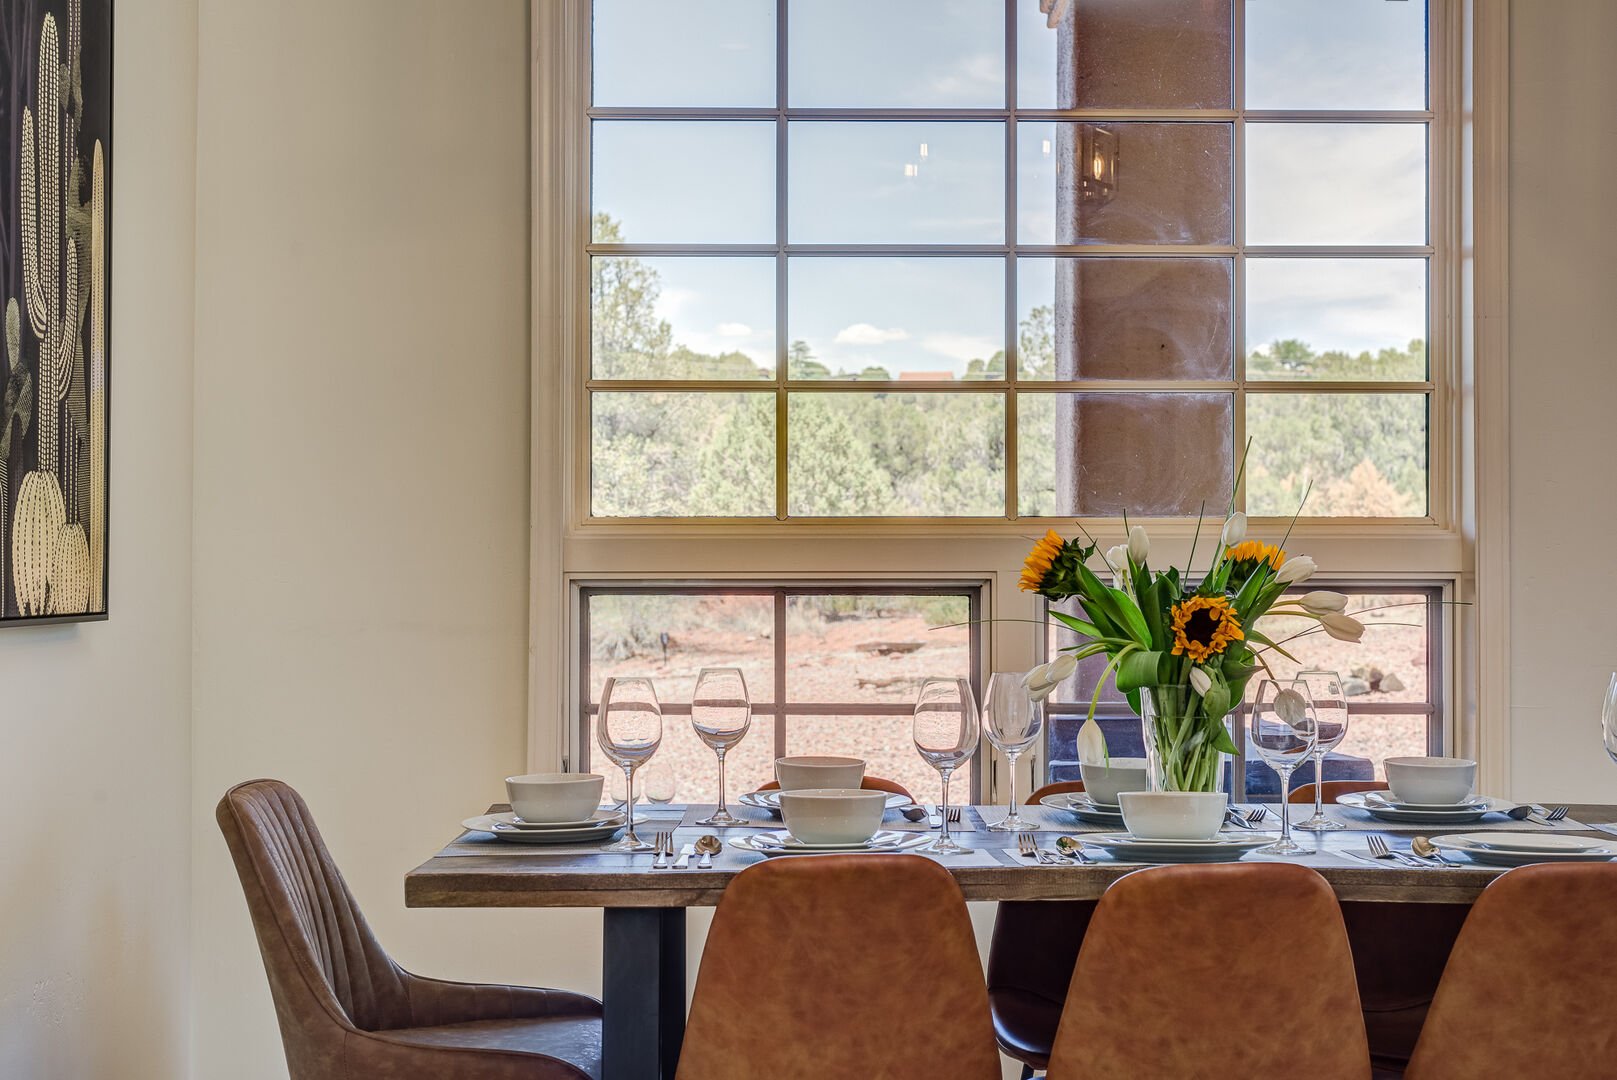 Enjoy the Light and Views While Gathered Around the Dining Table